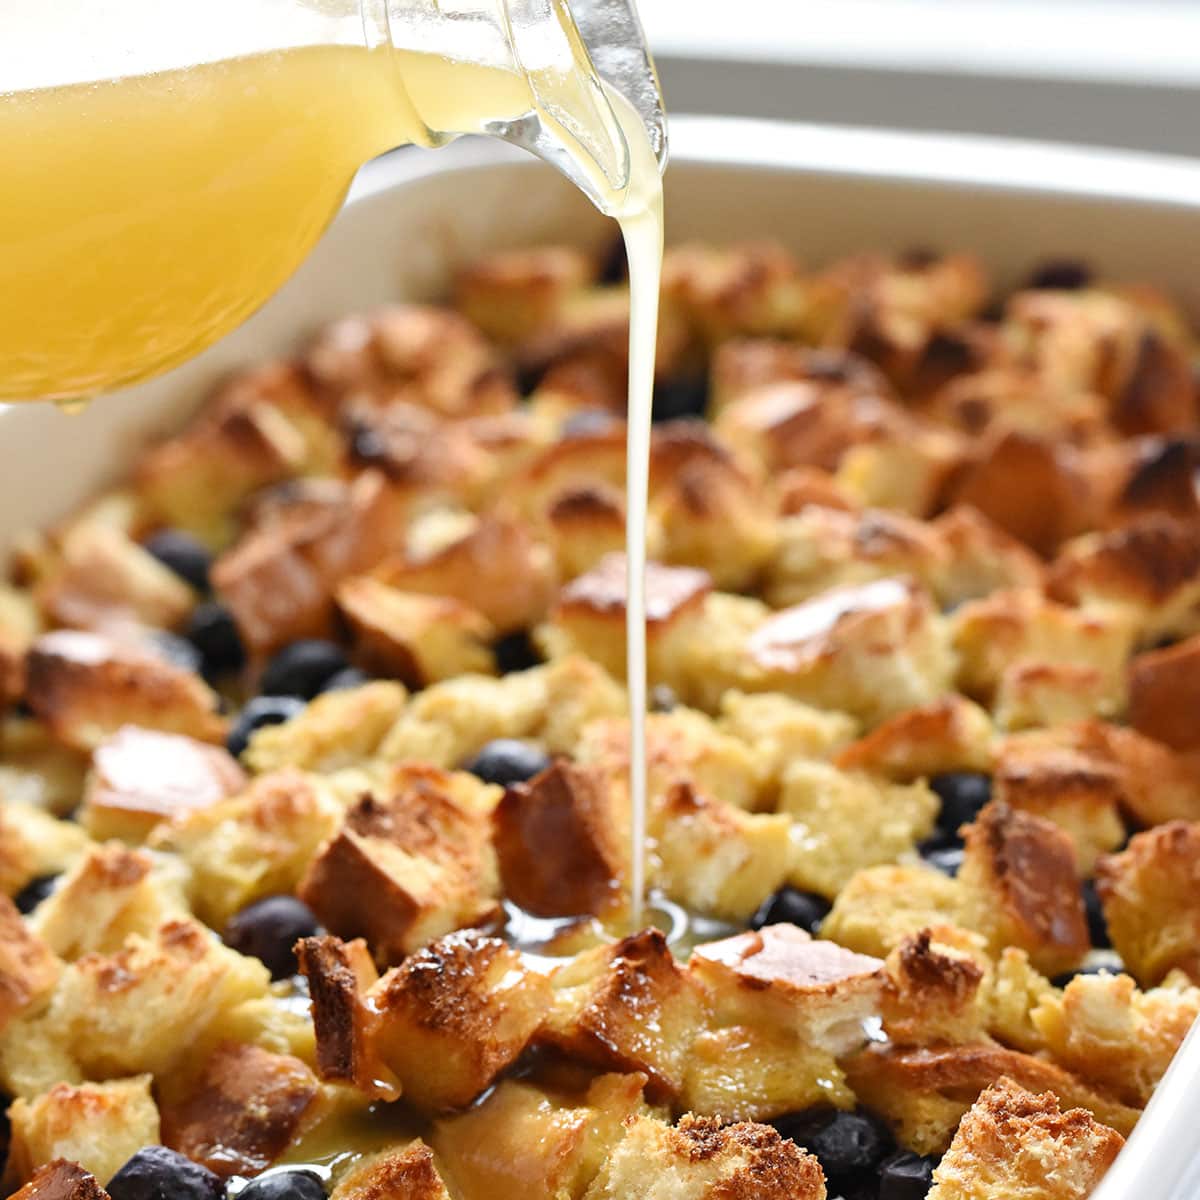 Overnight Lemon Blueberry French Toast Casserole in dish with lemon syrup being poured.